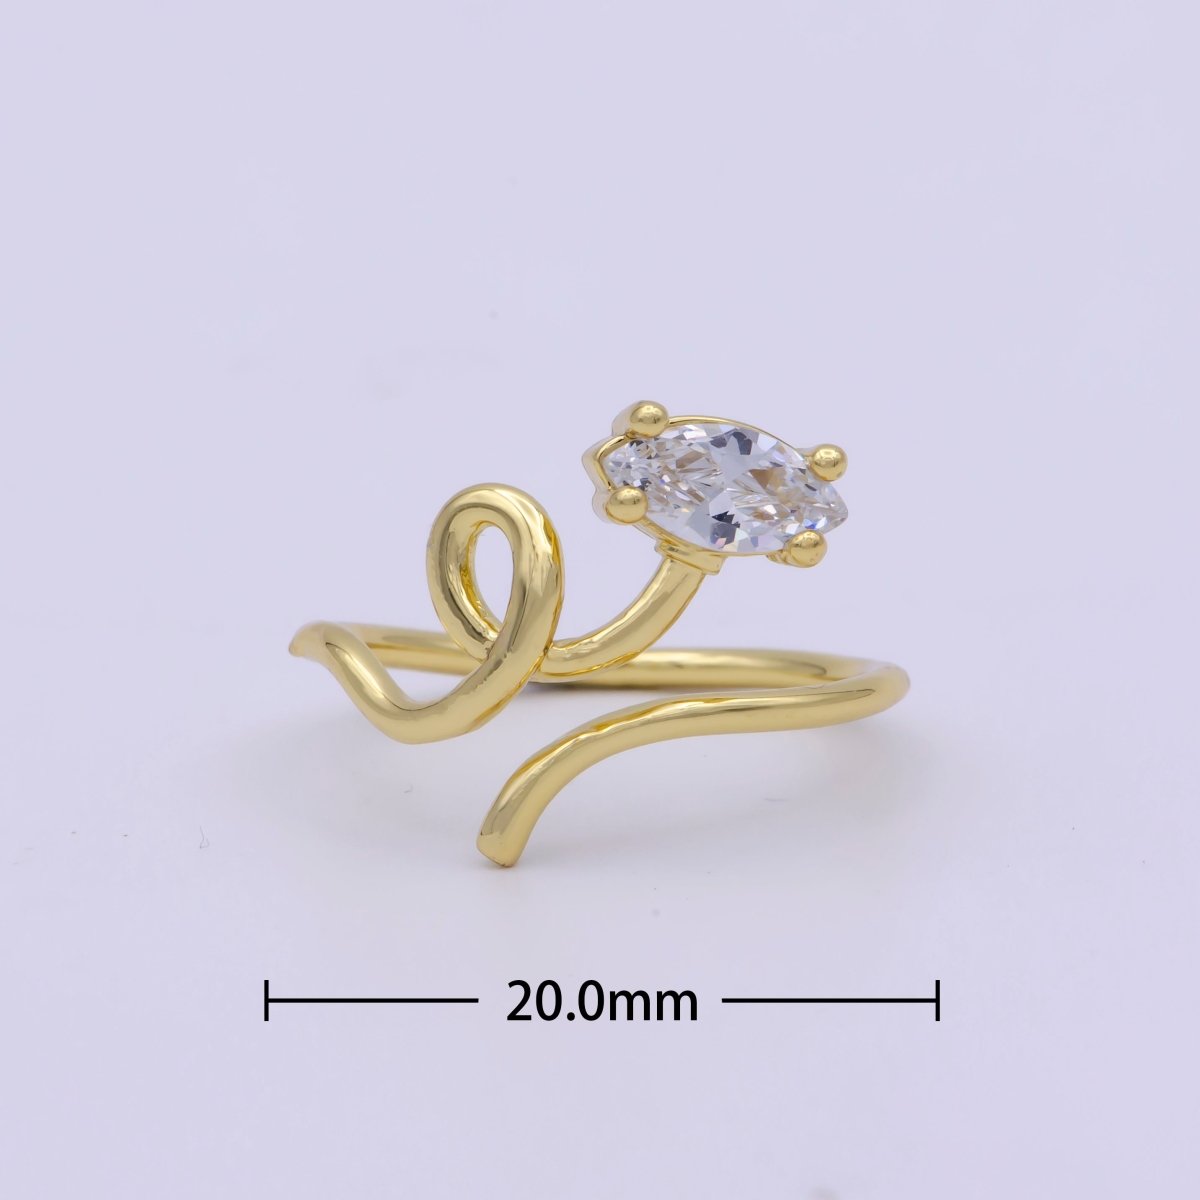 Vine Snake Shape Jewelry Rings Slim Gold Filled jewelry Party ring Gift idea U-149 - DLUXCA